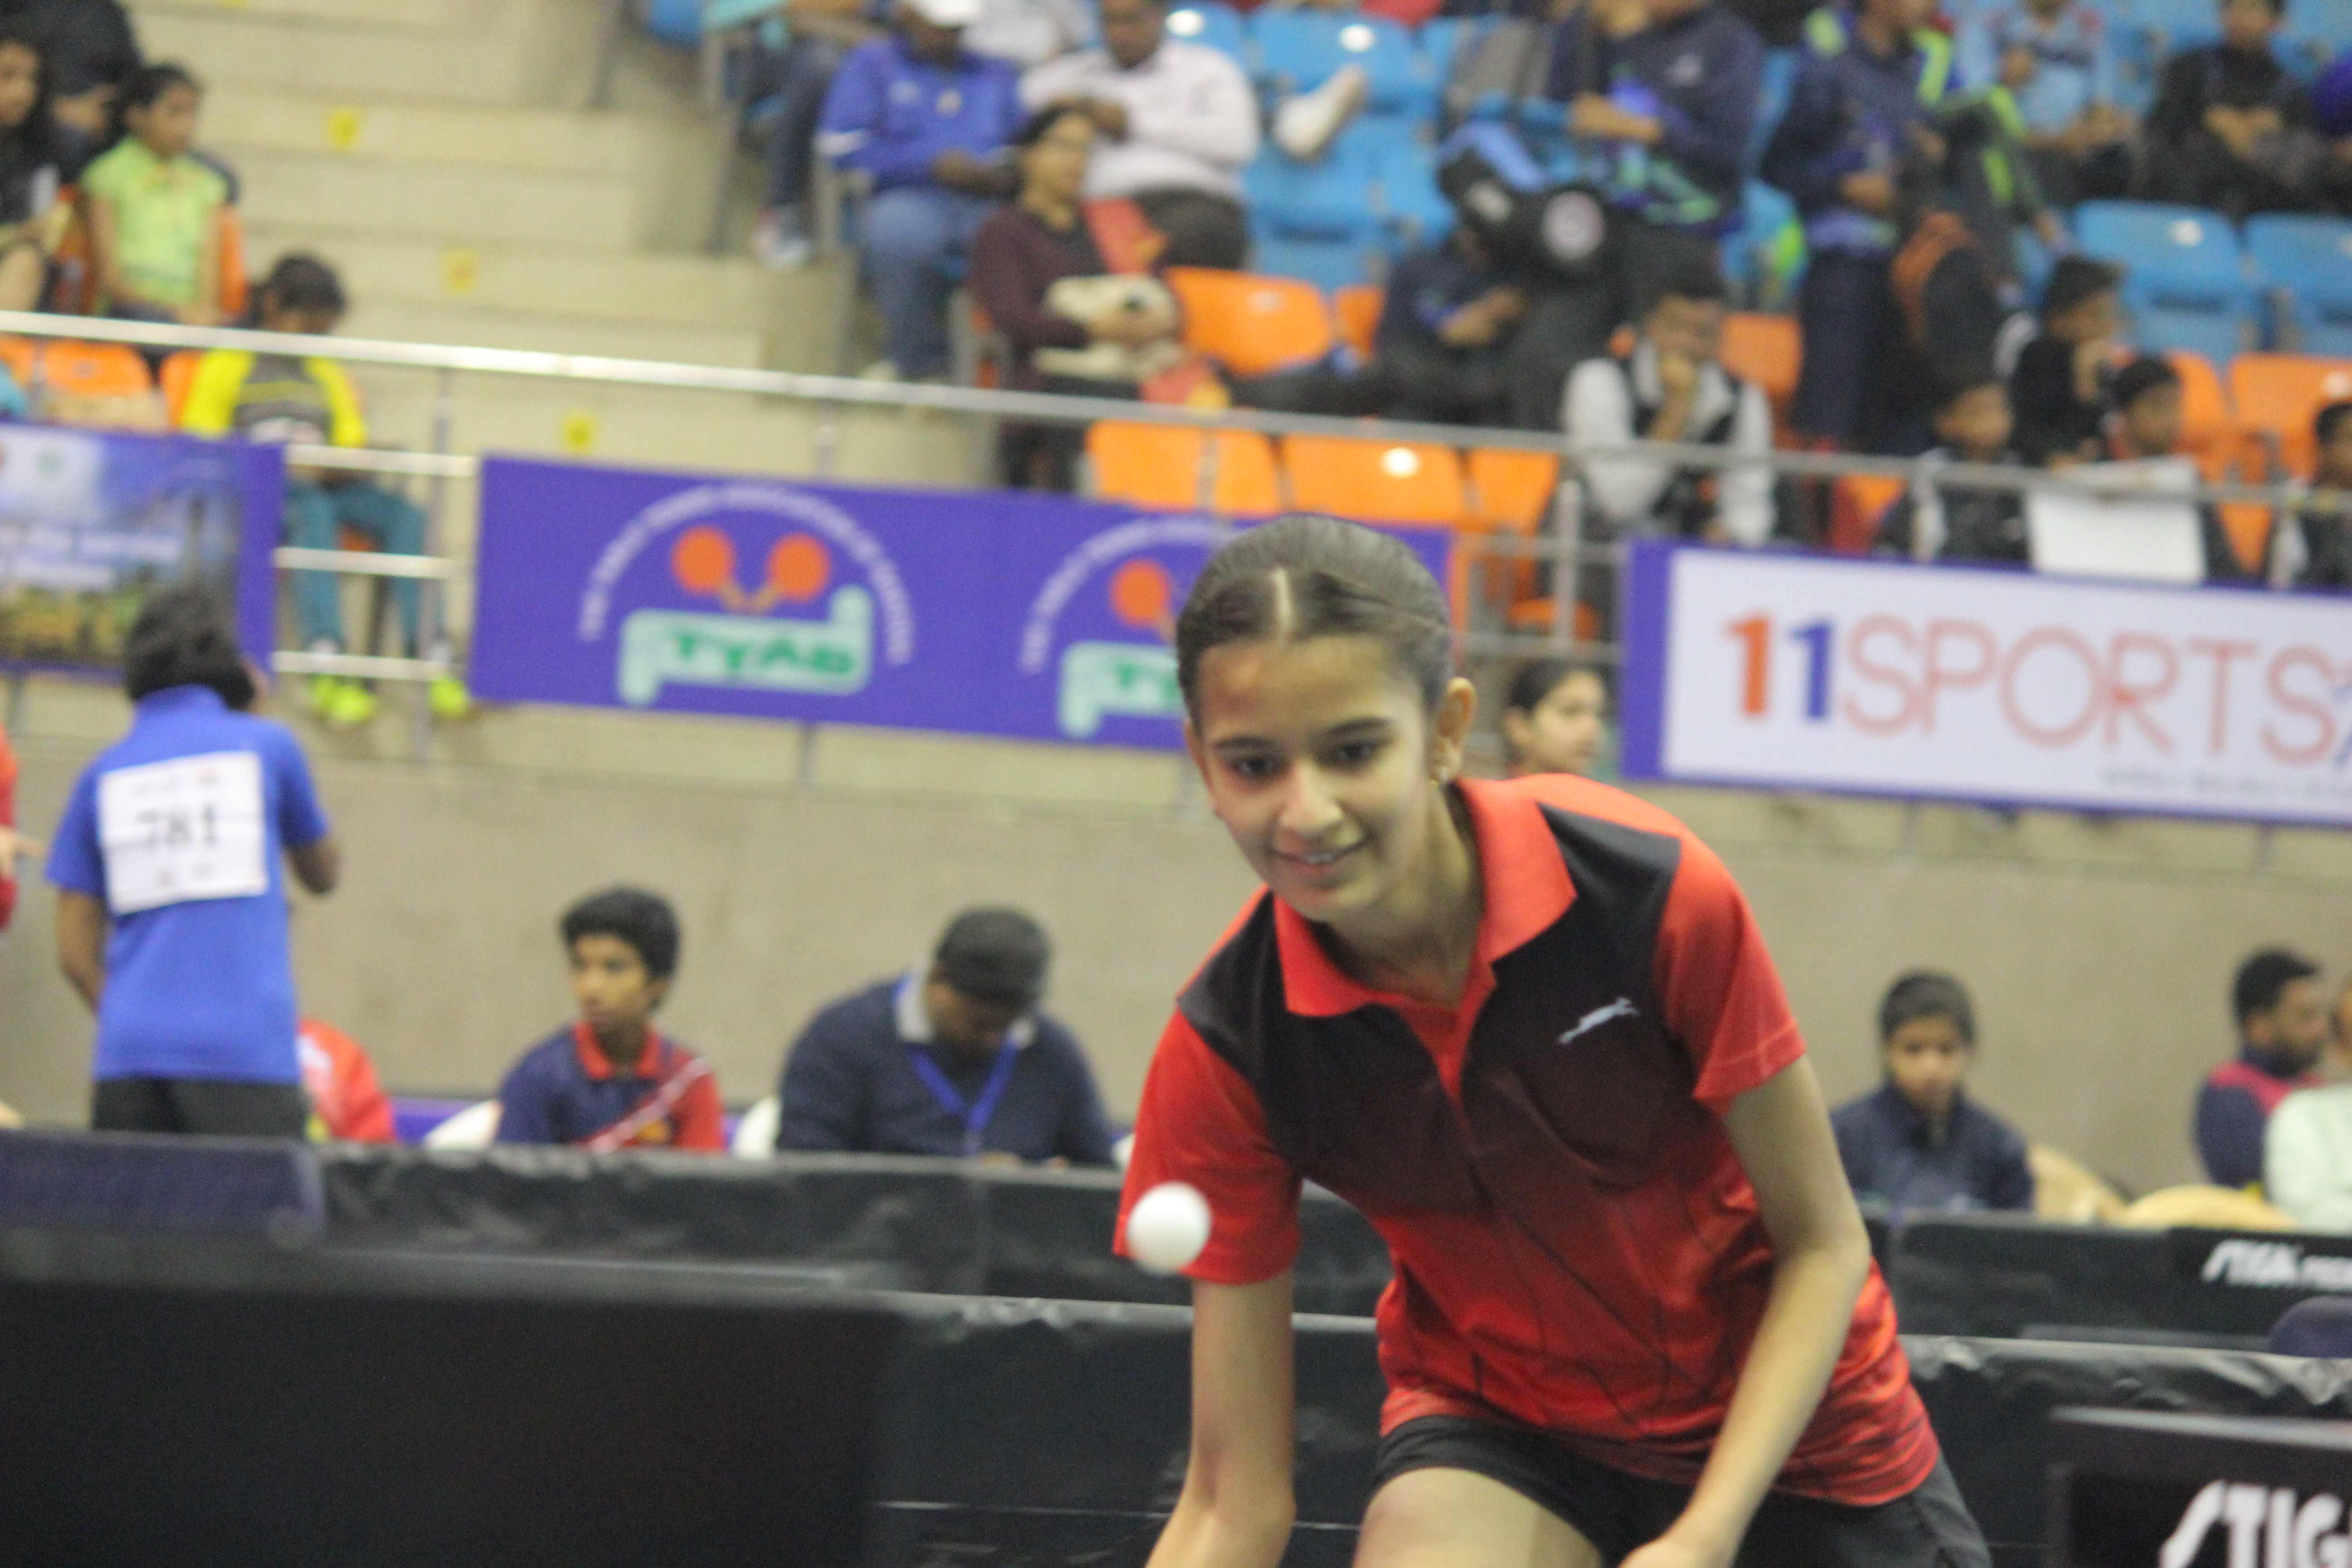 Gujarat team reign on Day 2 of 11SPORTS 63rd National School Games Table Tennis Championships